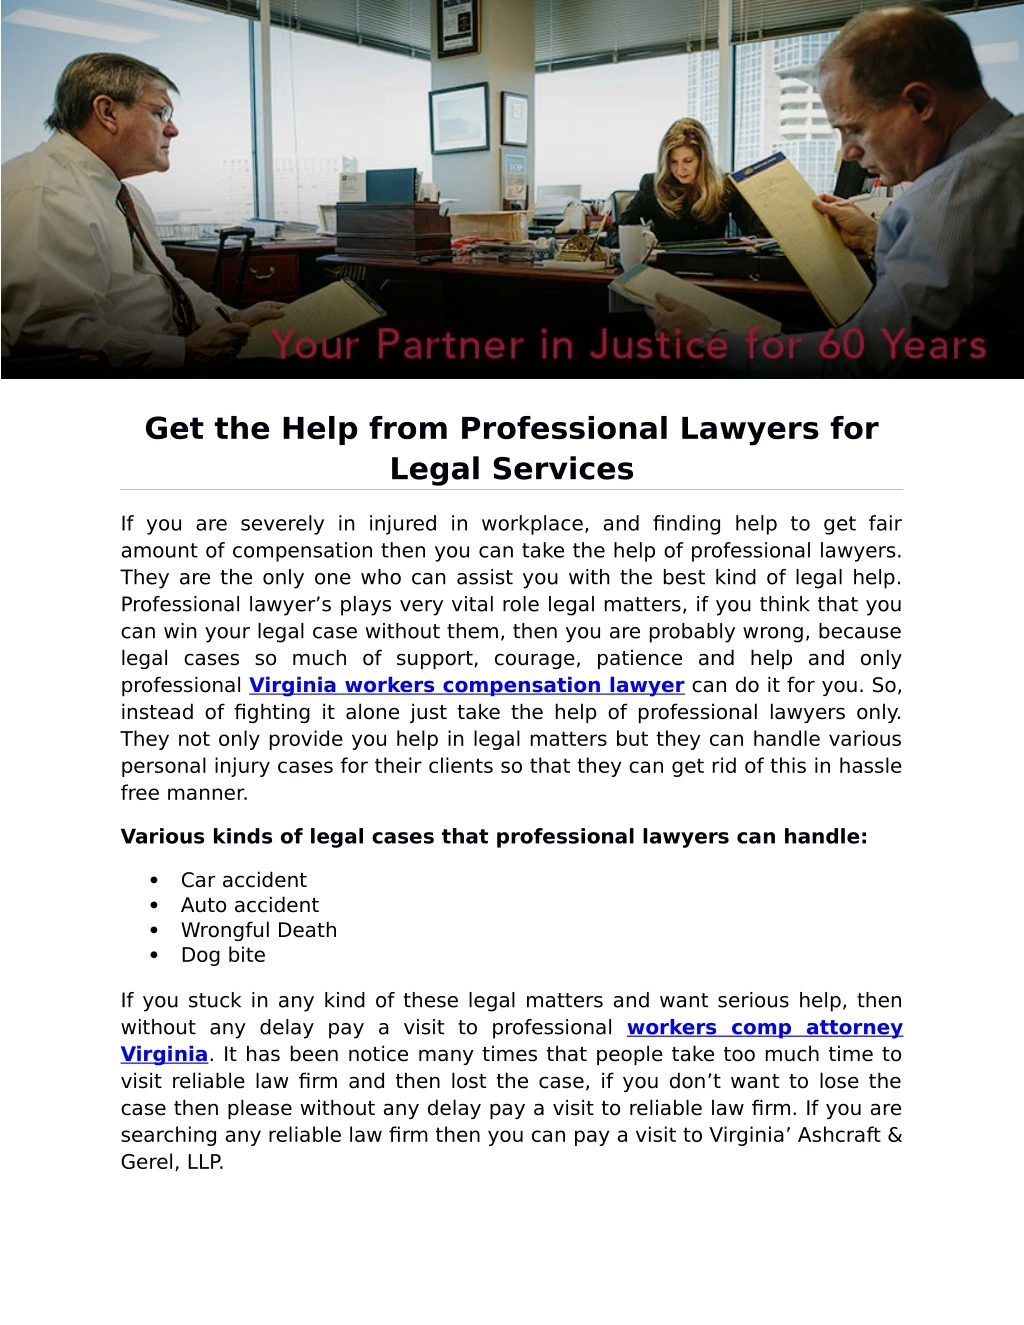 get the help from professional lawyers for legal